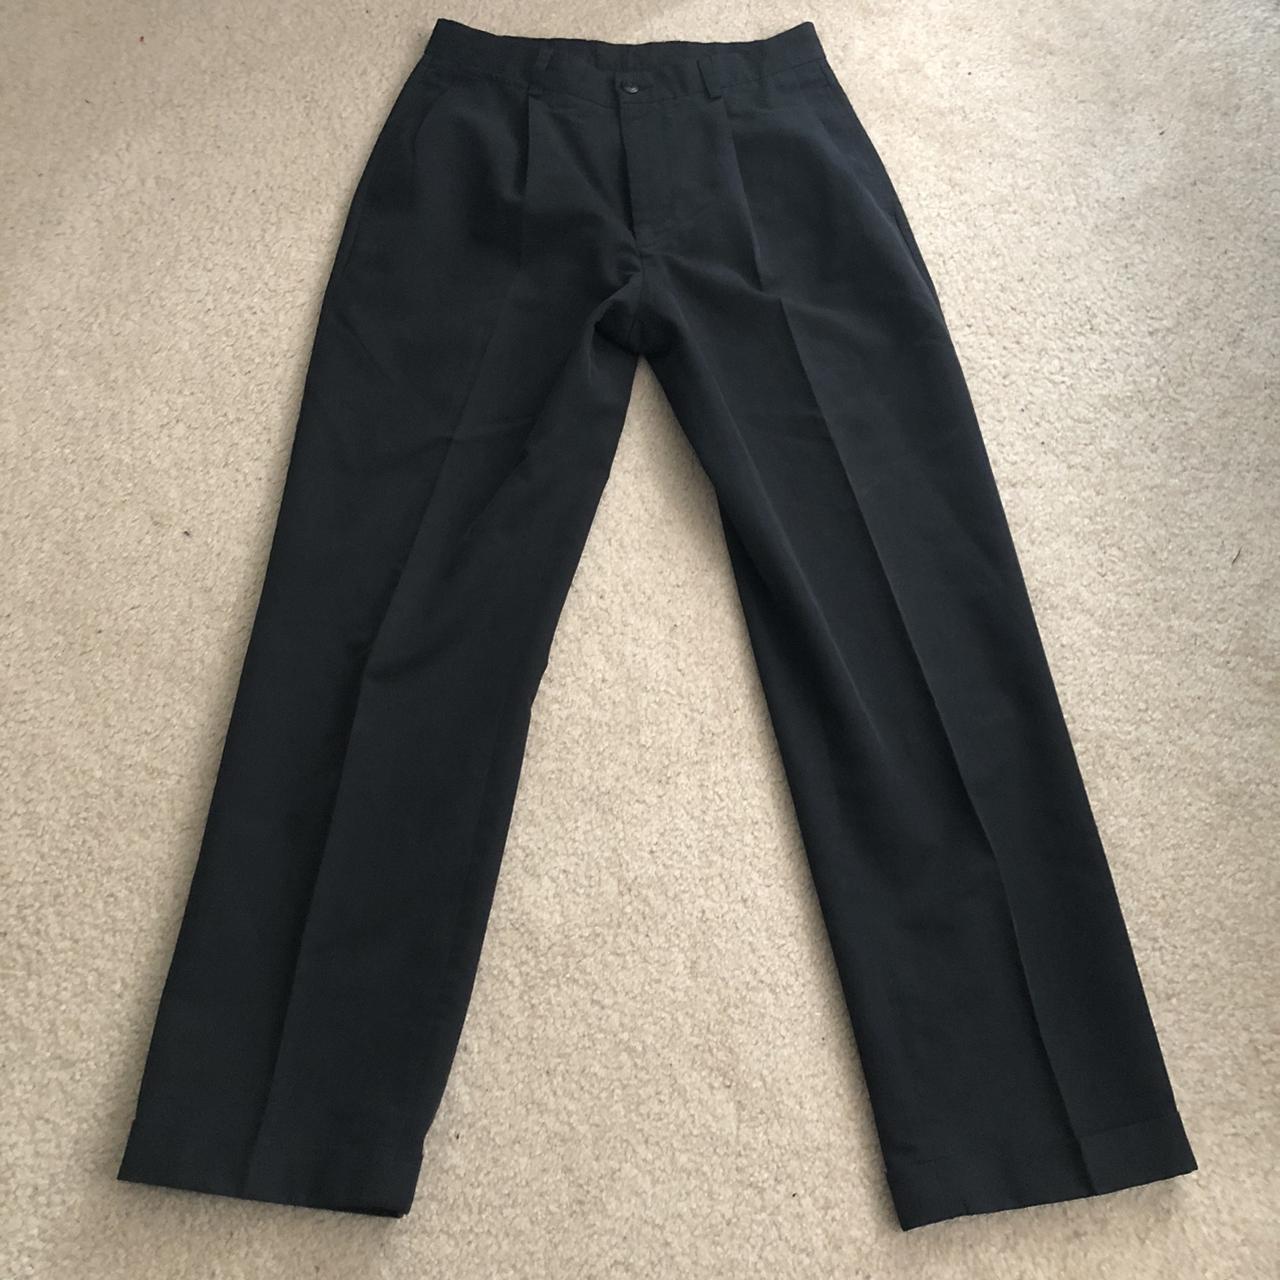 Black Nautica Casual Pants. Perfect for casual wear,... - Depop